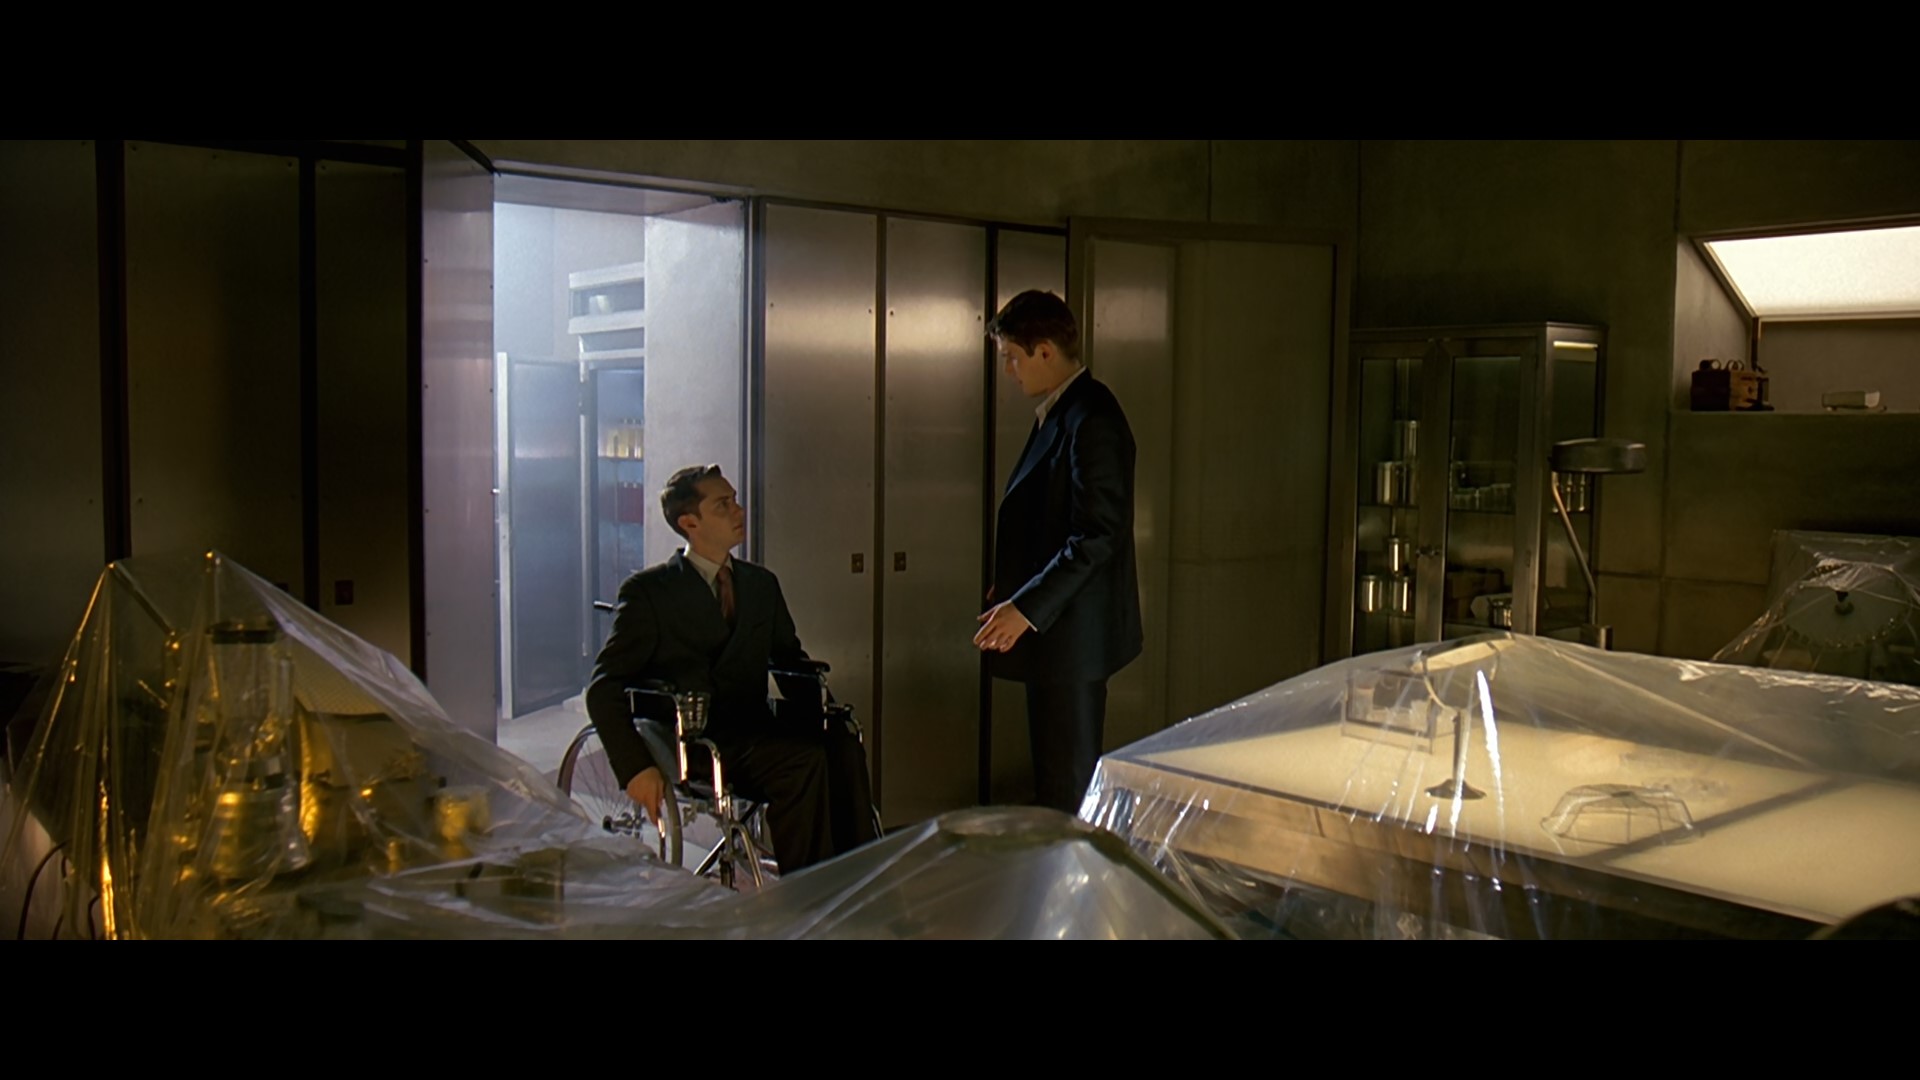 Vincent receives help from Jerome (Source - movie Gattaca)